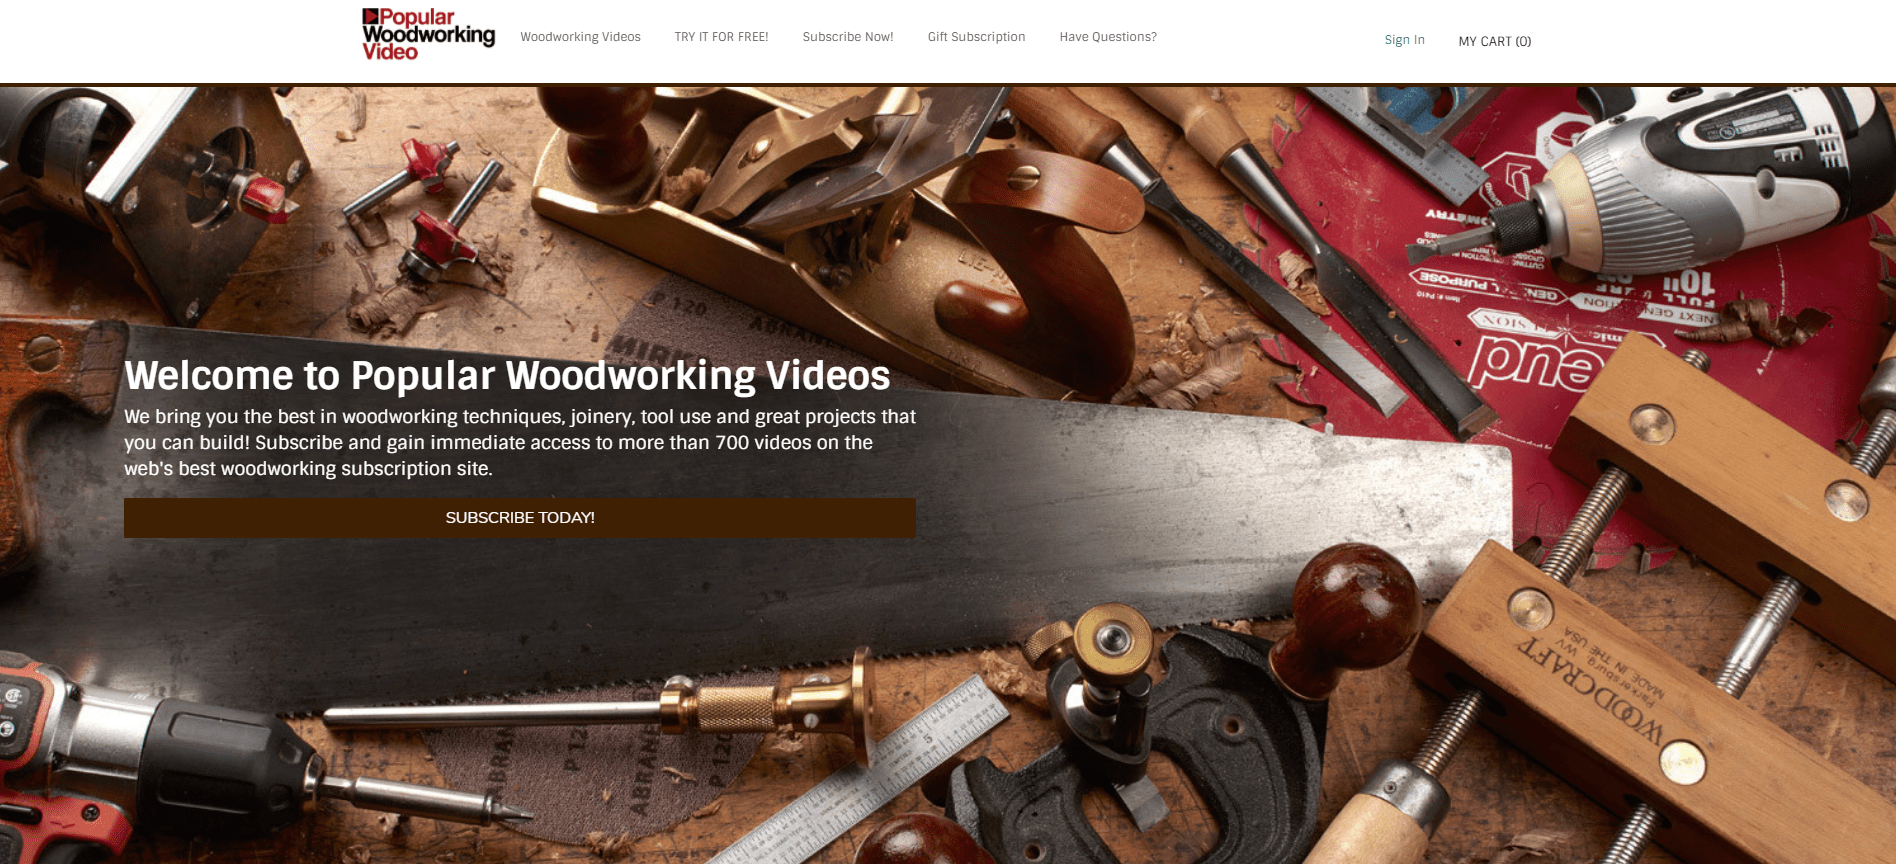 Popular Woodworking Video Home Page screenshot